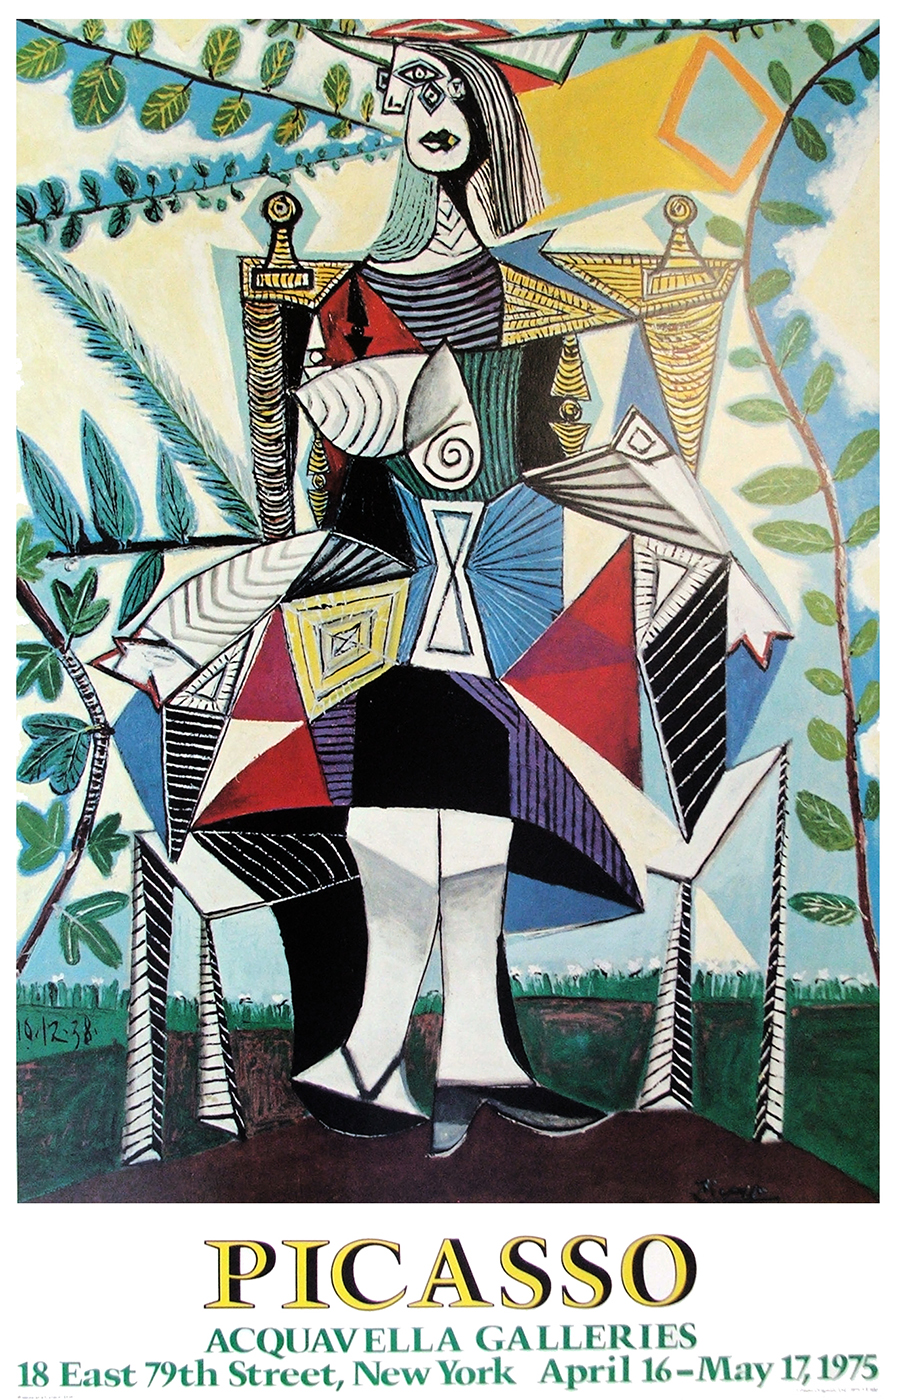 Woman In Garden 1938 By Pablo Picasso Classic Prints